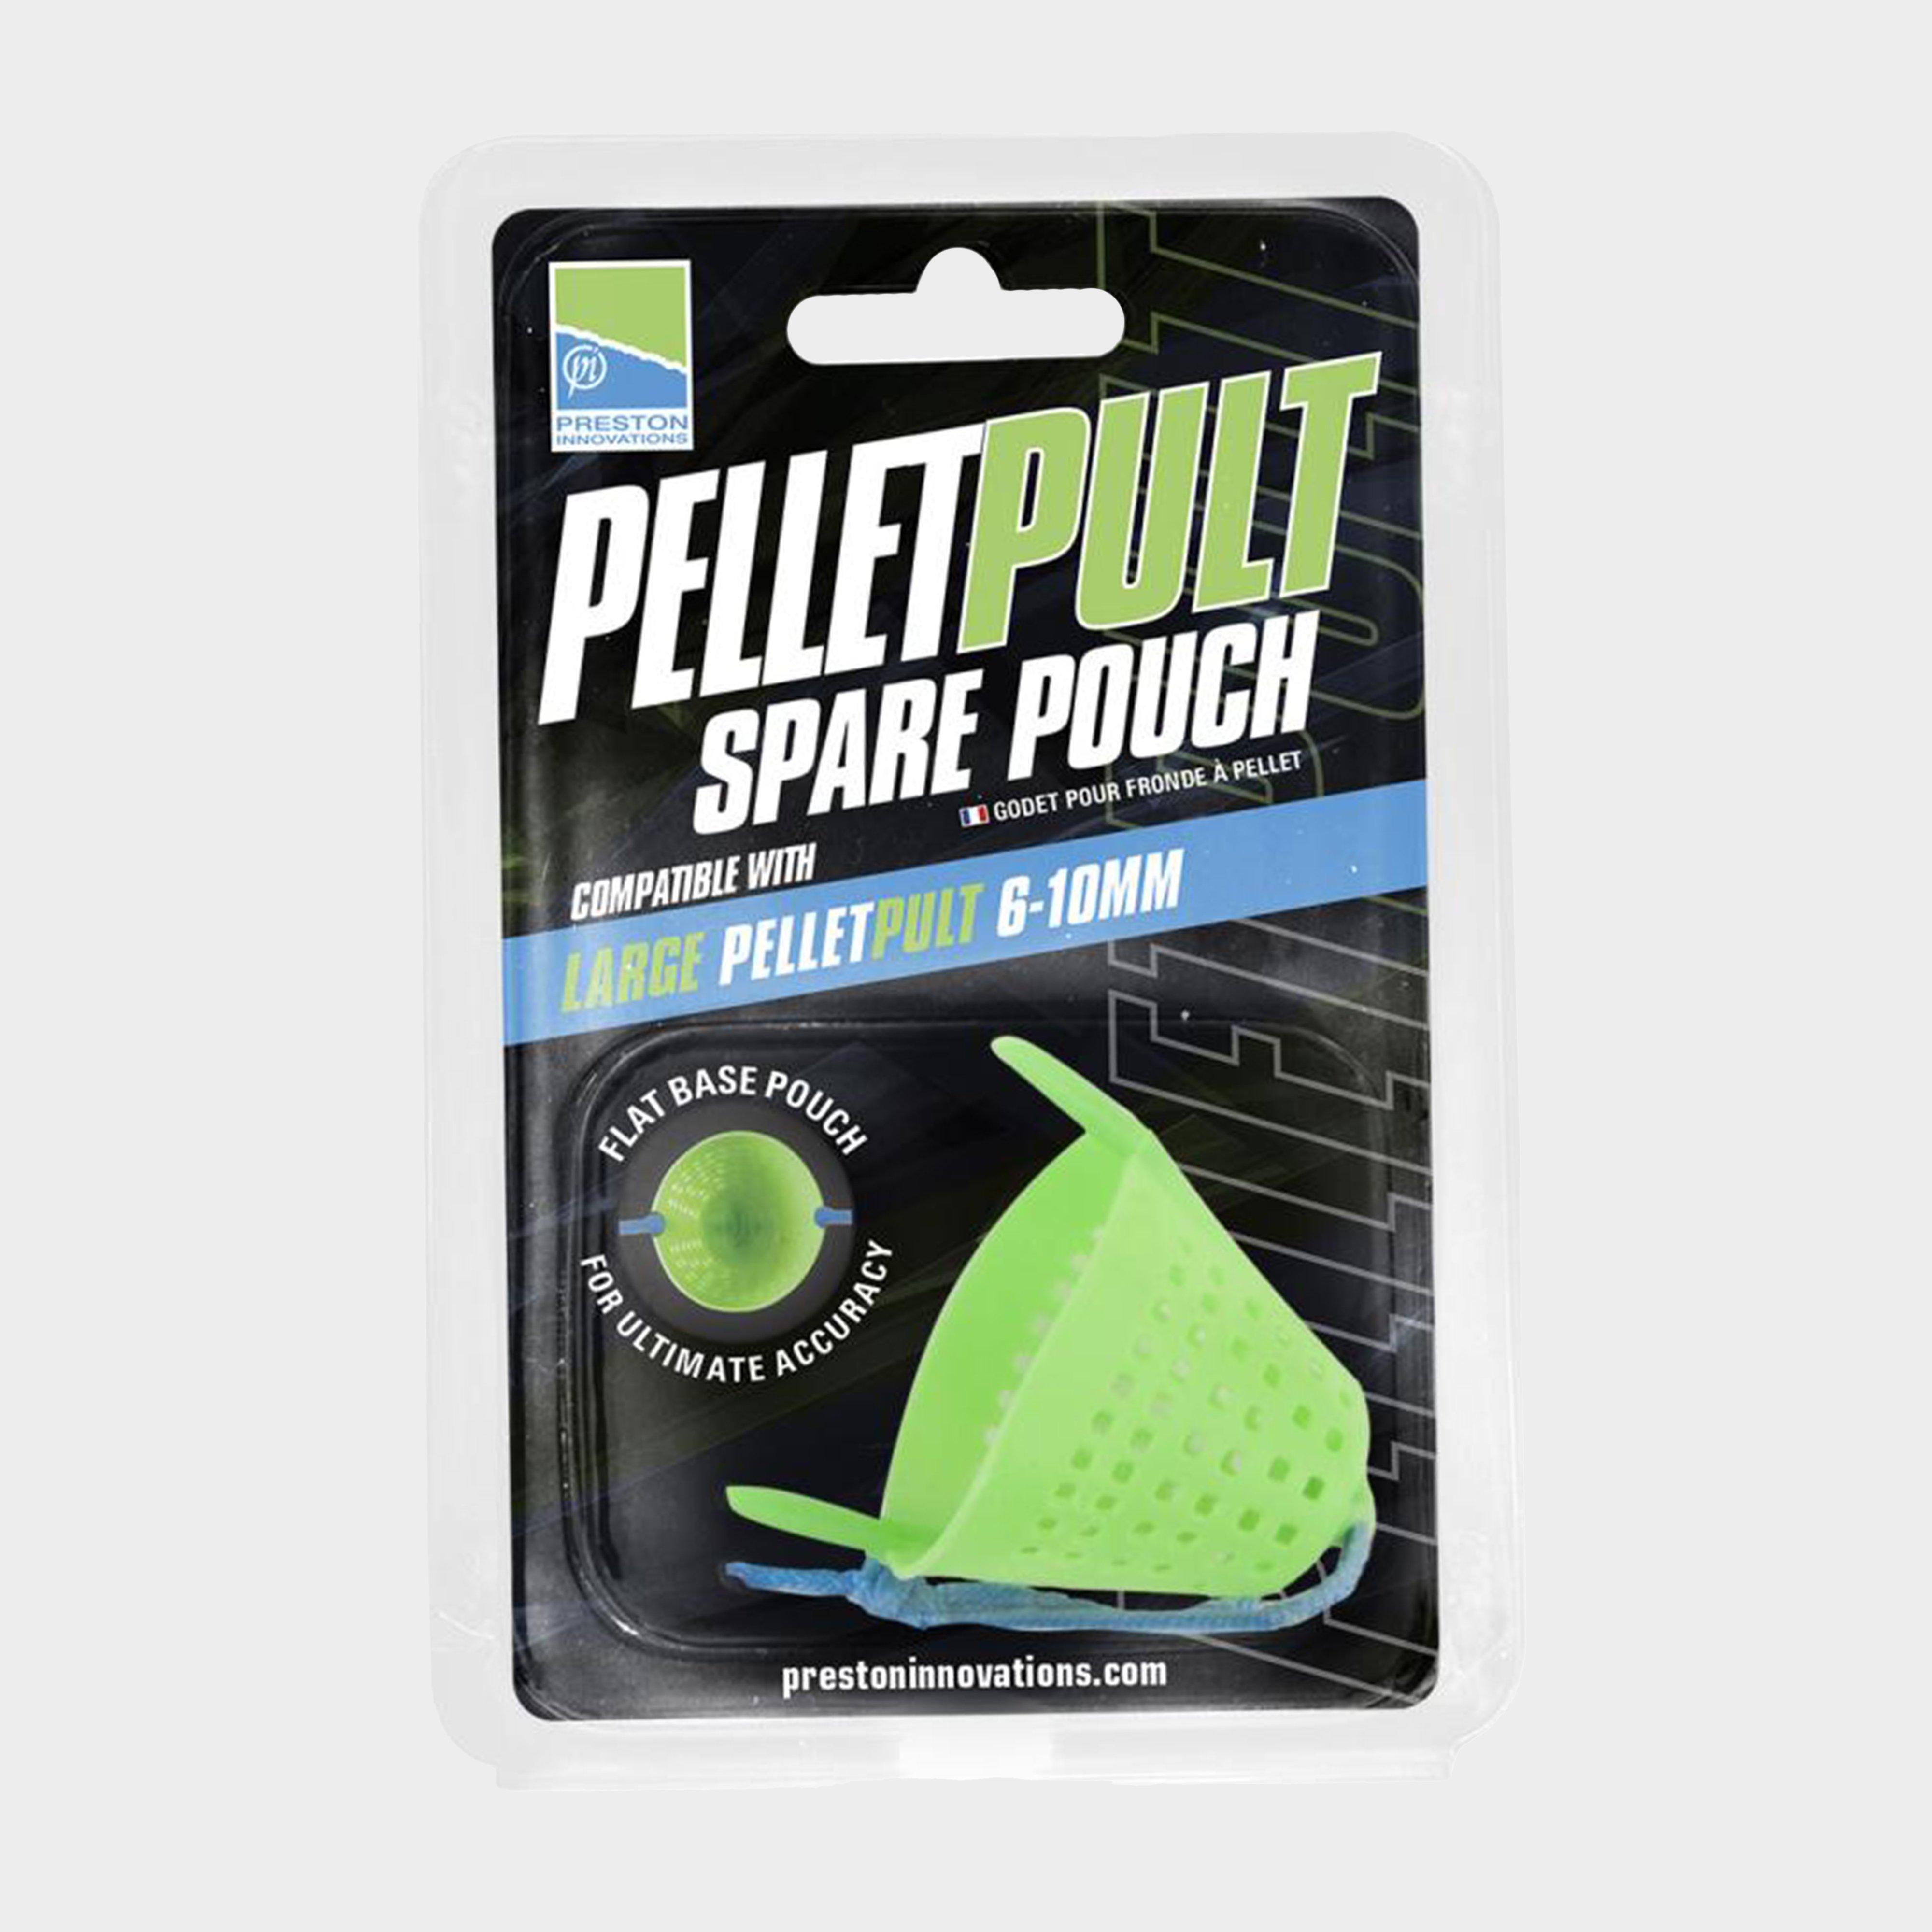 Photos - Other for Fishing Preston INNOVATION Pelletpult Spare Pouch - Large, Black 